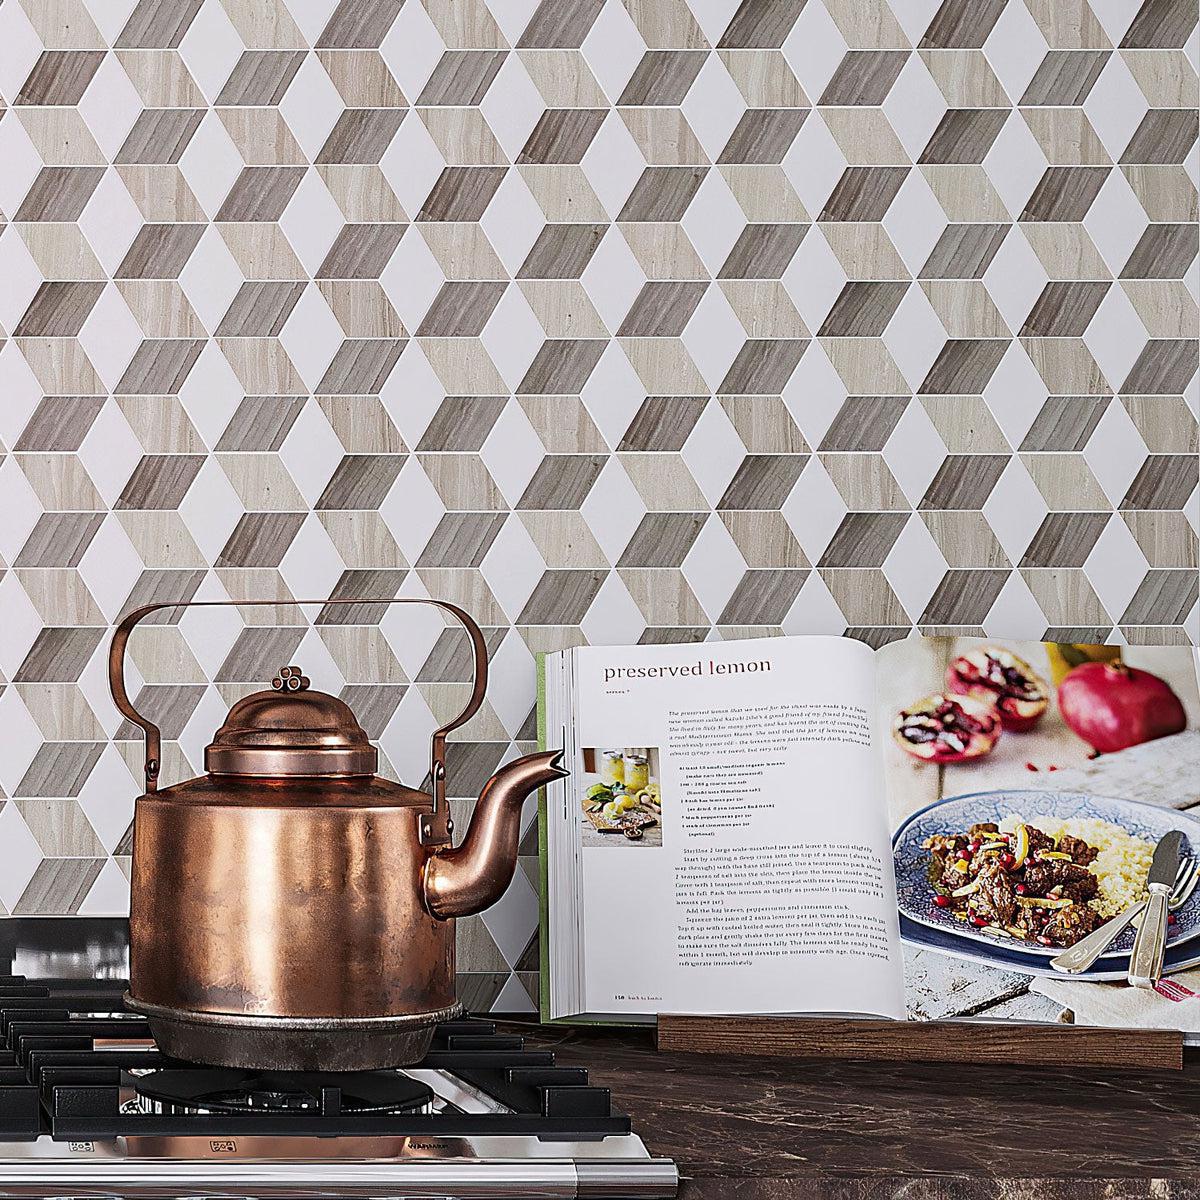 Recipe book on background of Hudson Cube Wooden Beige Marble Mosaic Tile Wall